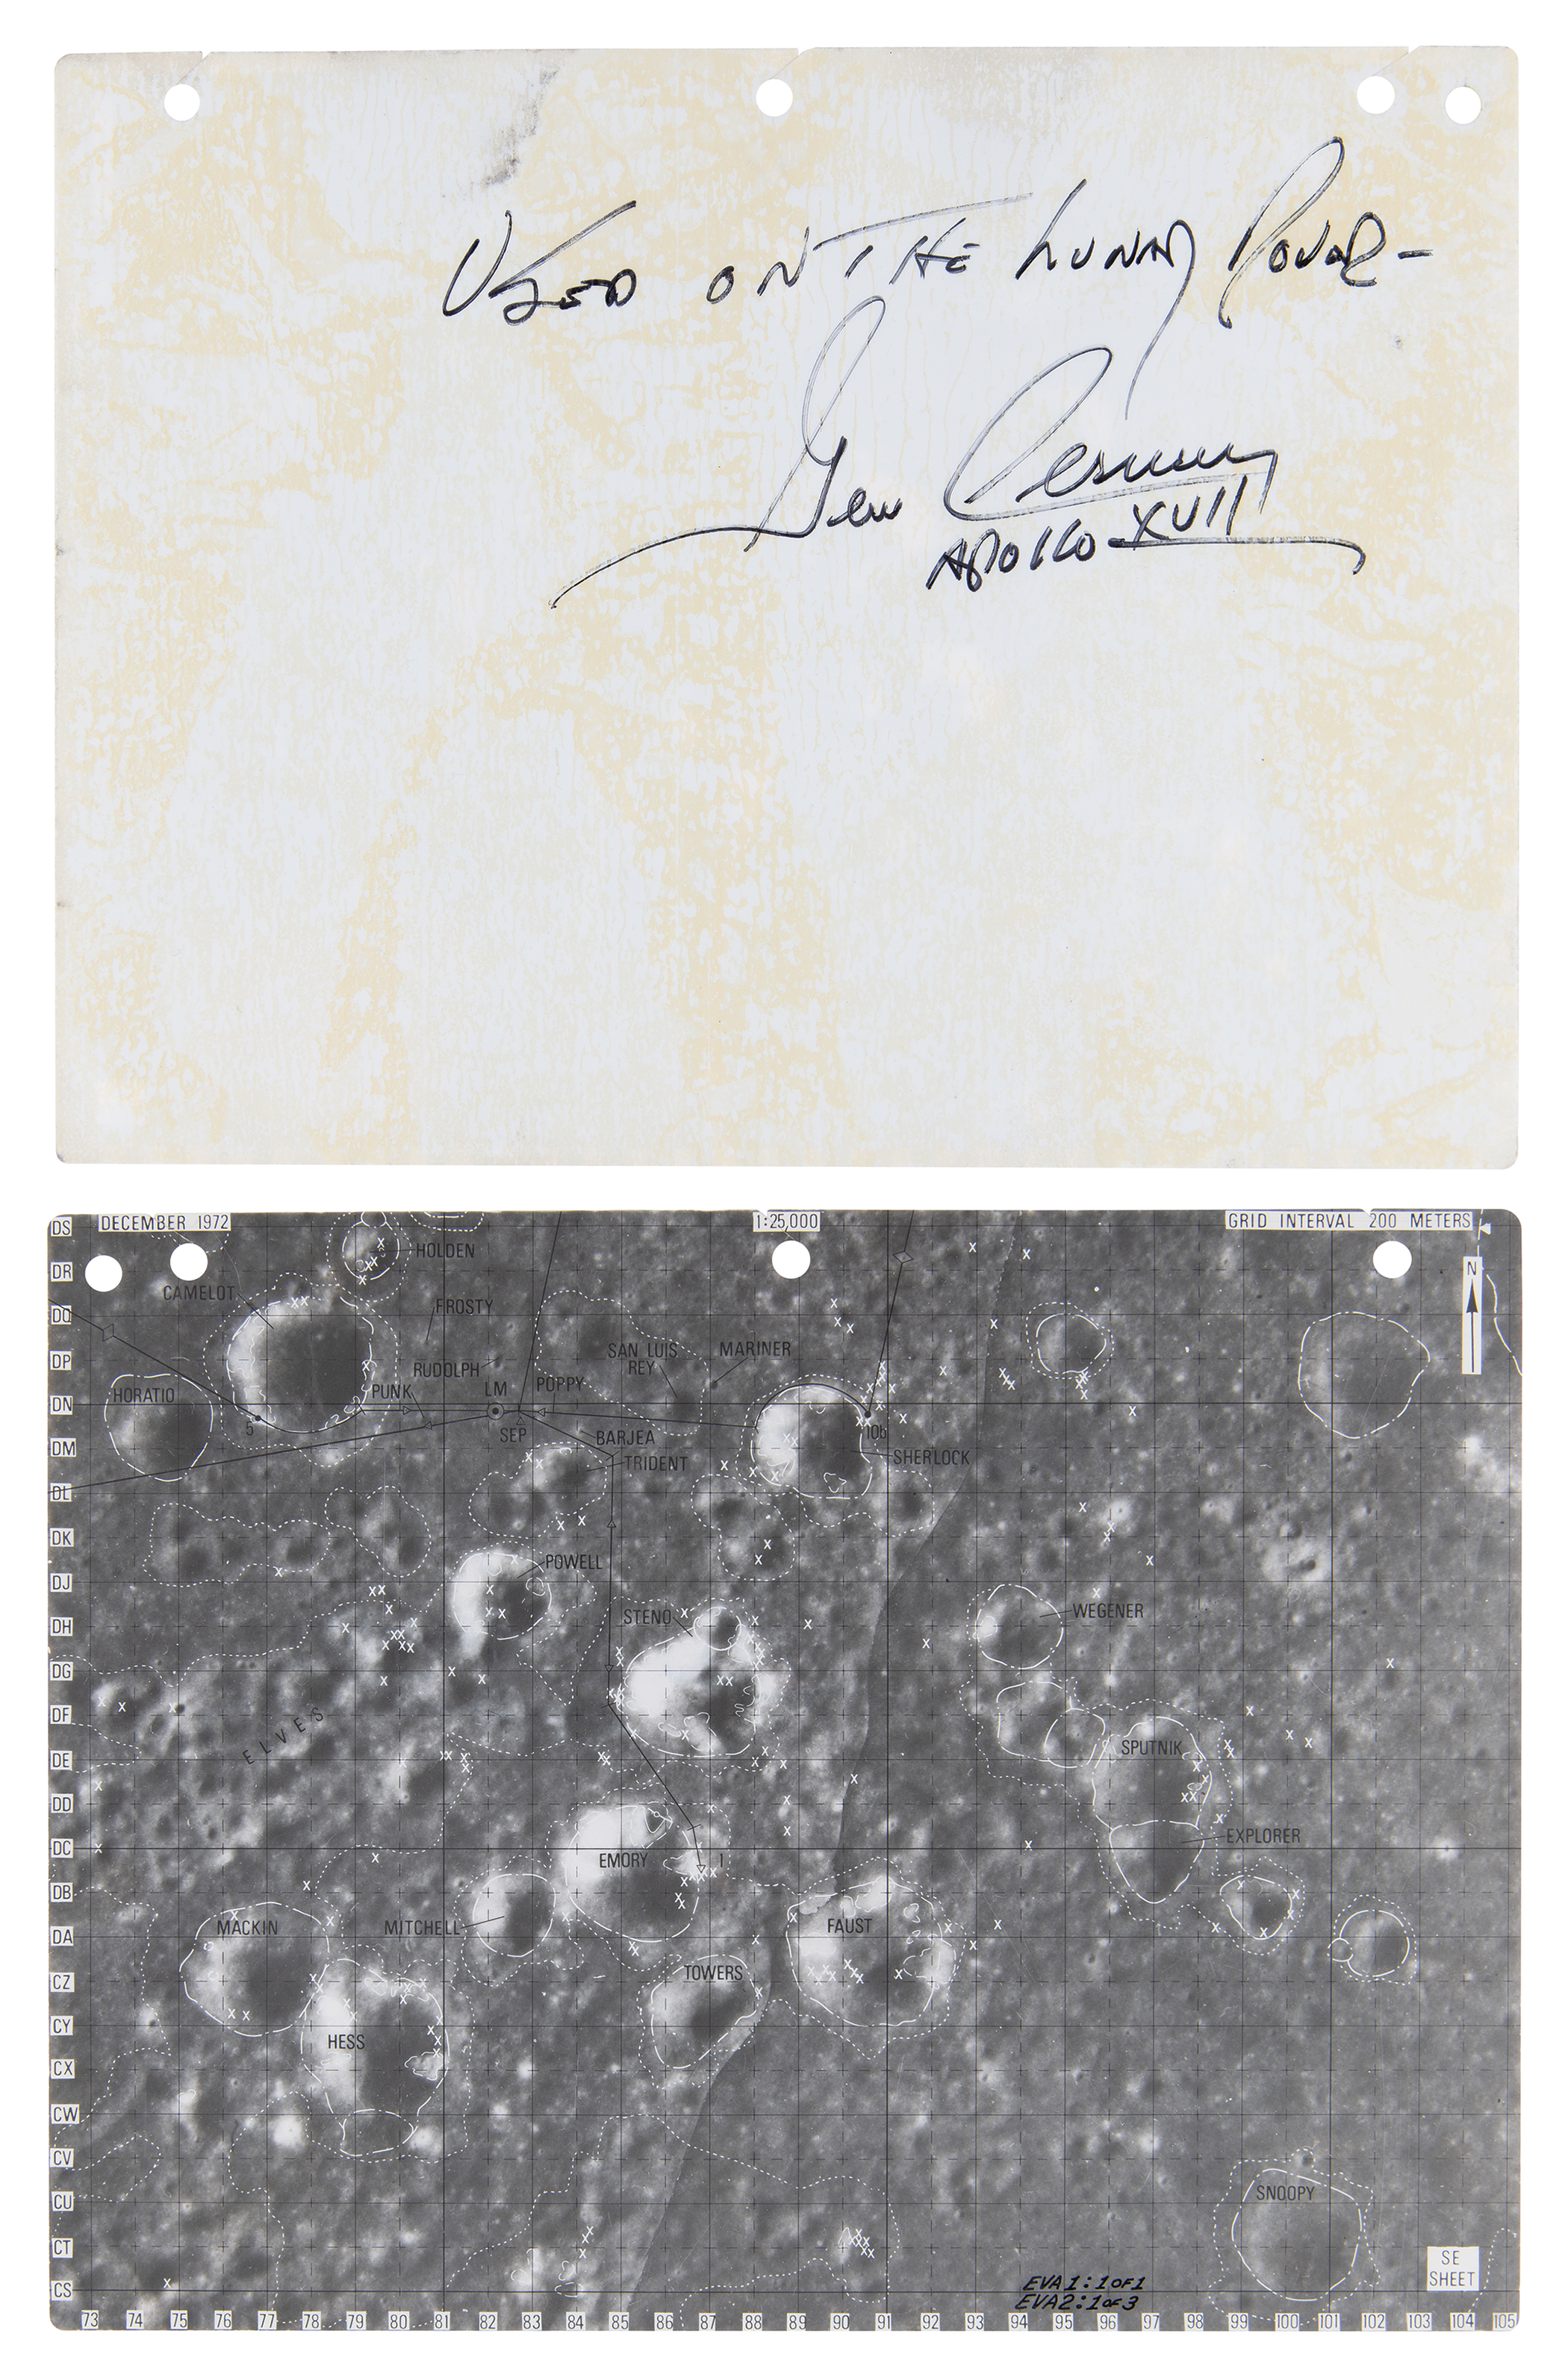 Lot #4300 Apollo 17 Lunar Surface-Used Rover Map Signed by Gene Cernan - Image 1